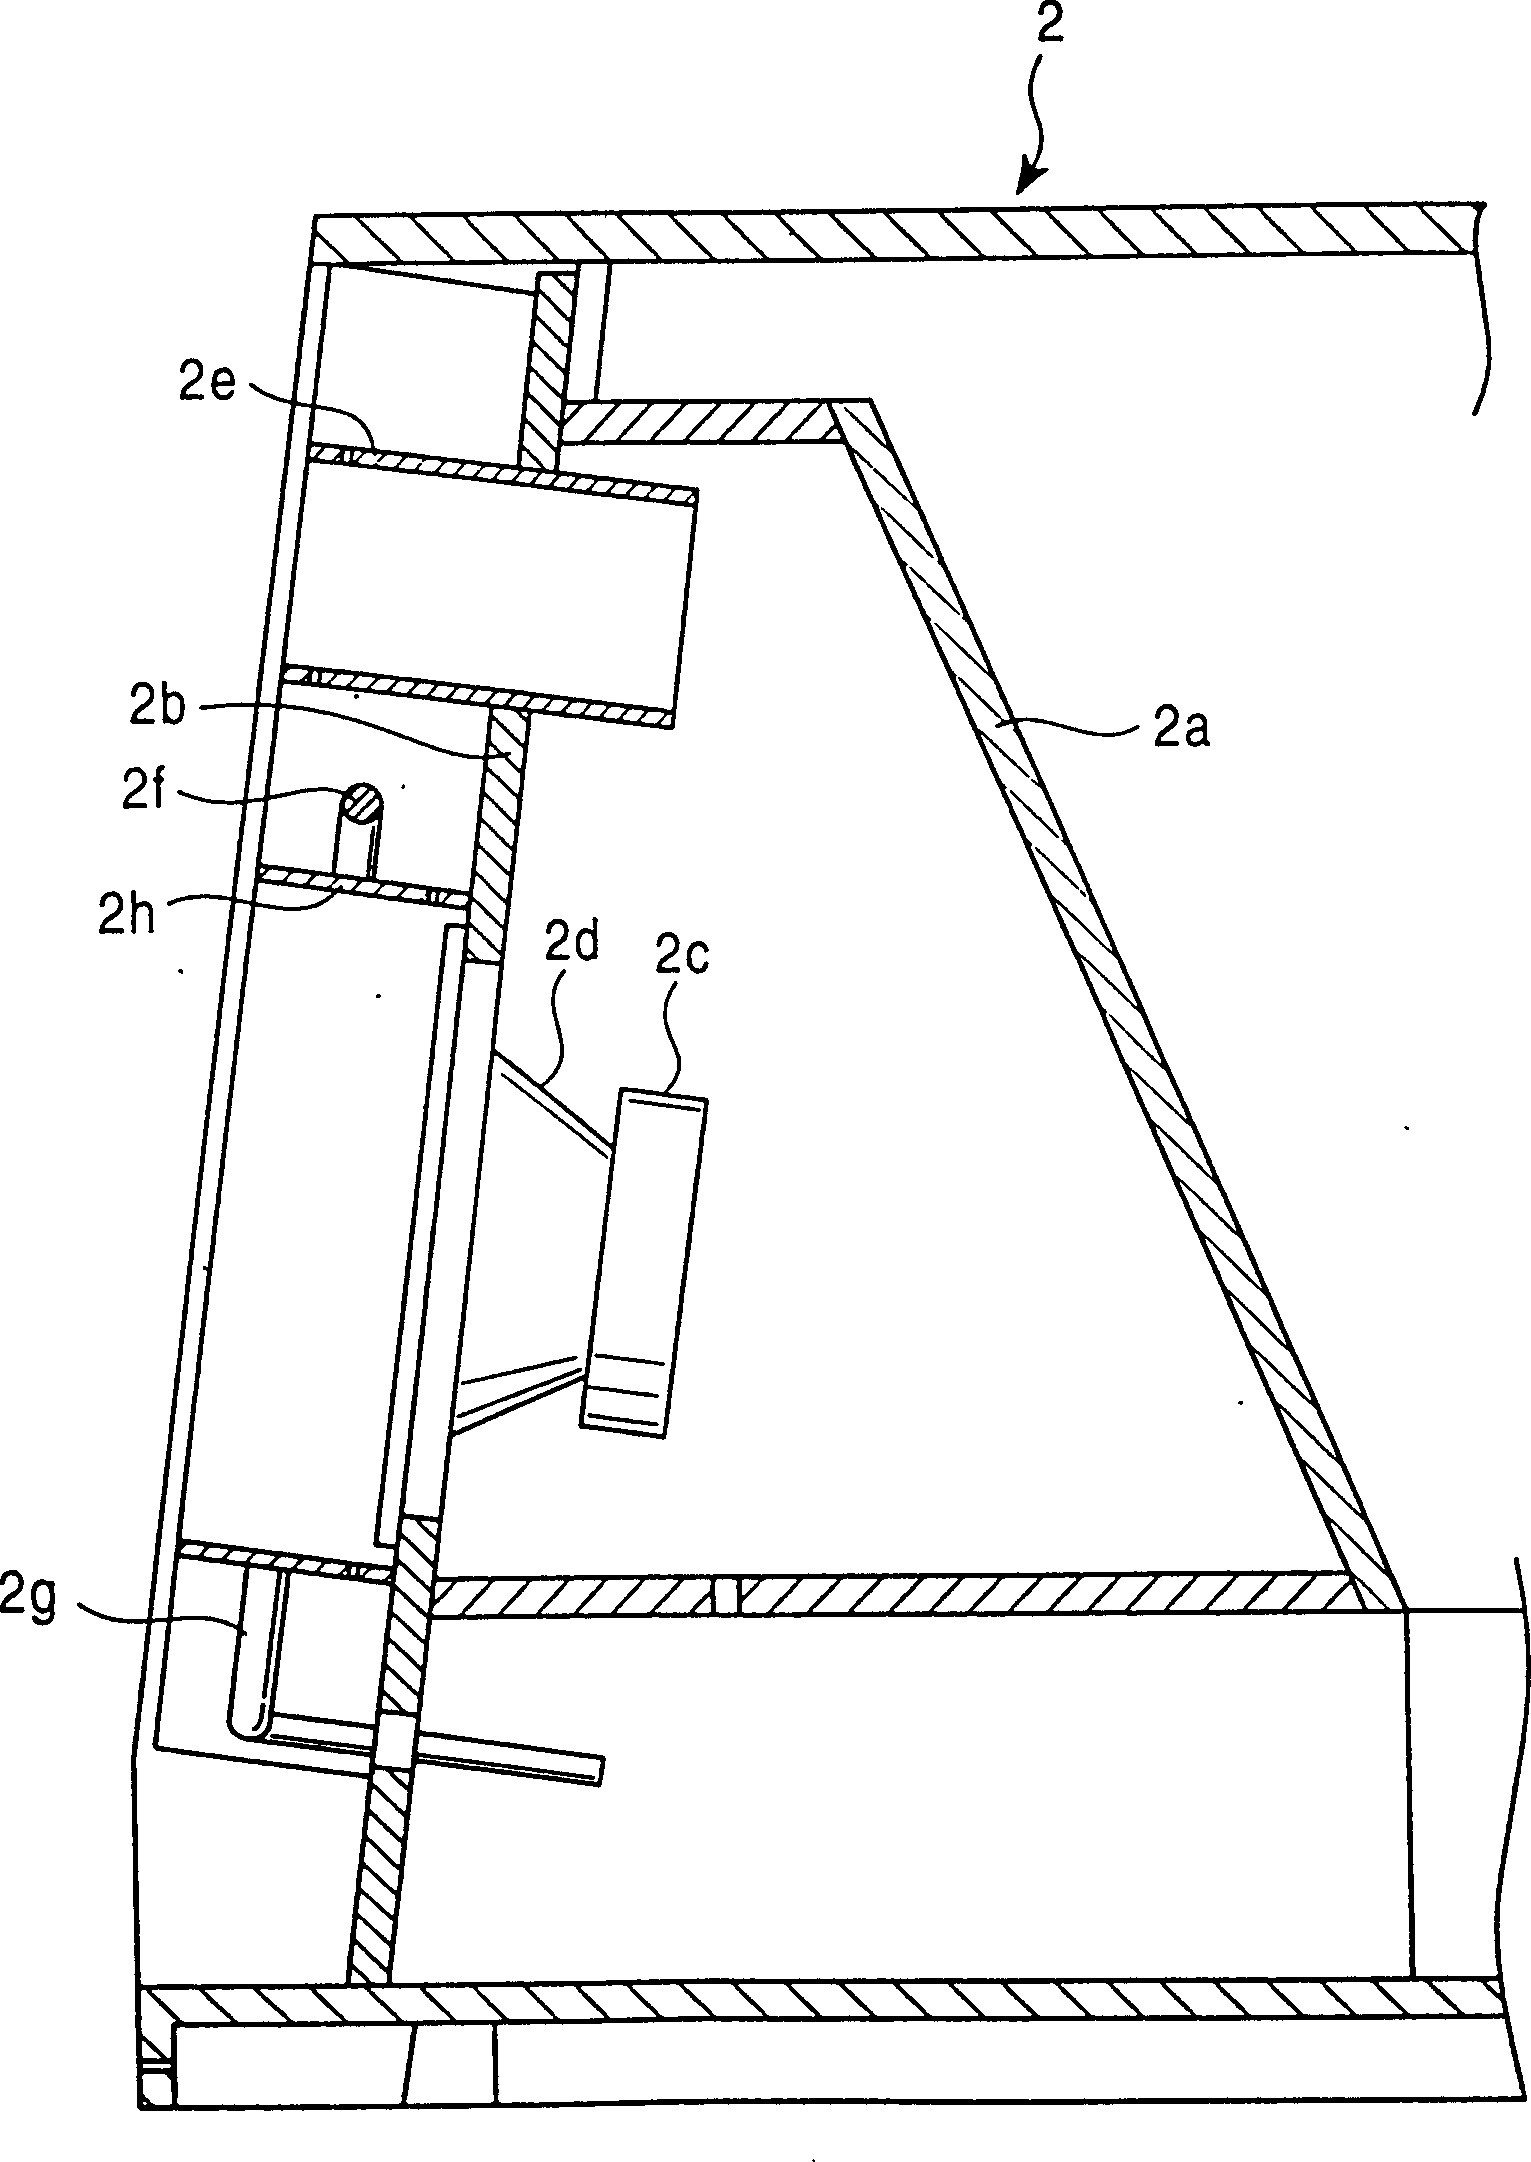 Dance game apparatus and board for making time thereof